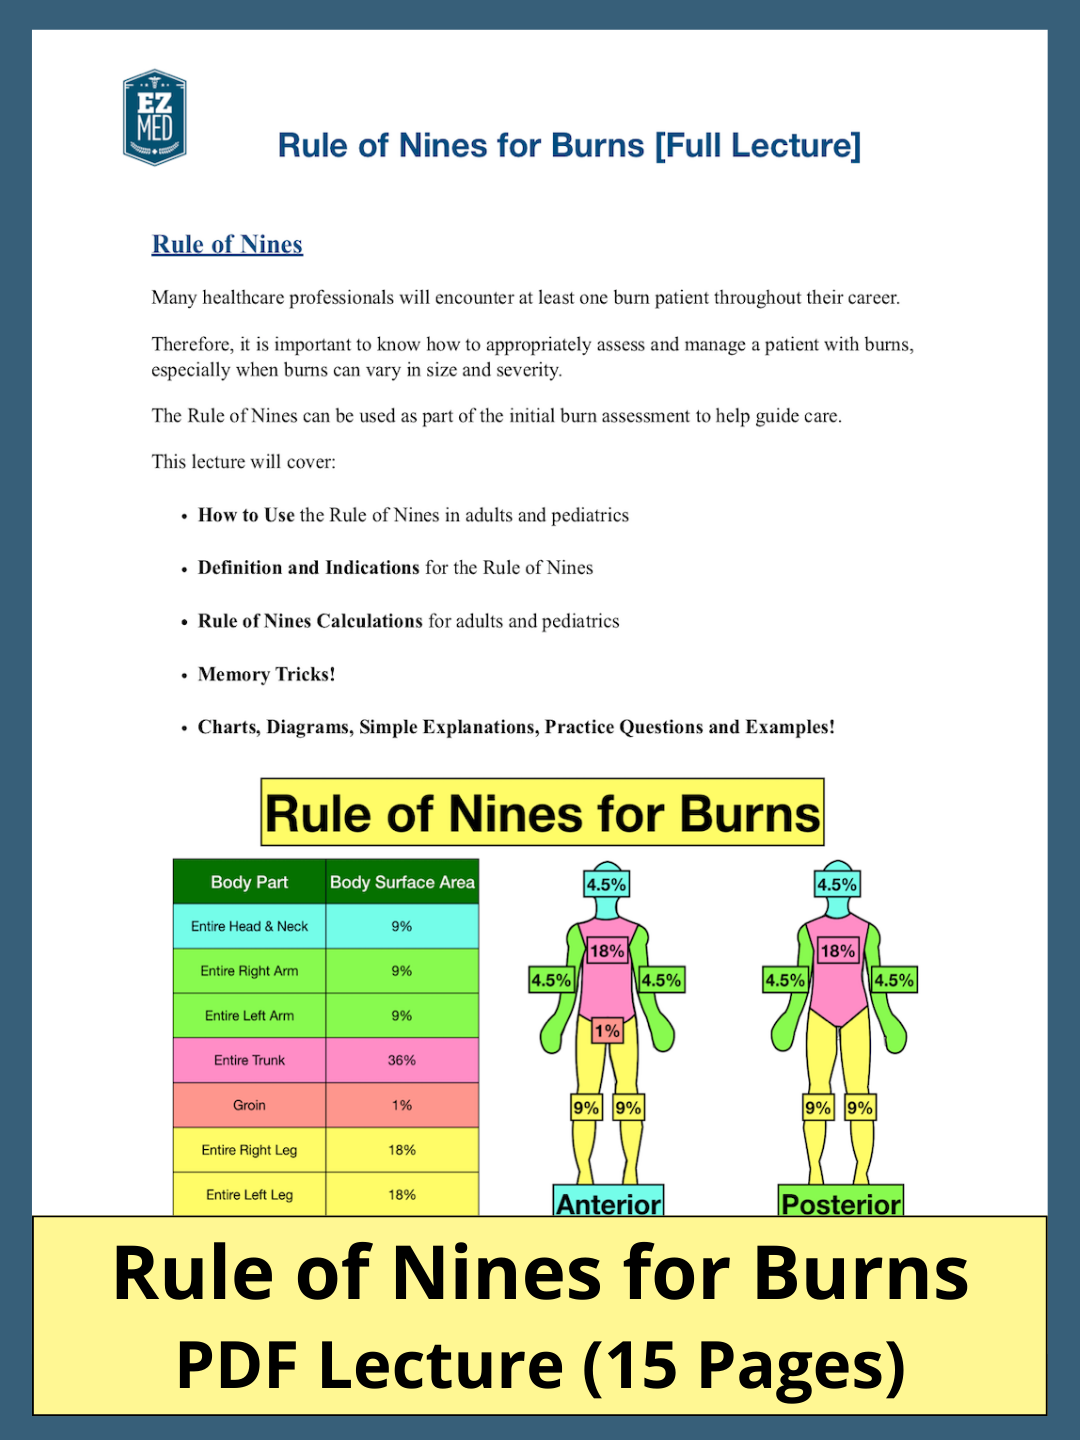 Rule of Nines for Burns [PDF Lecture] – EZmed